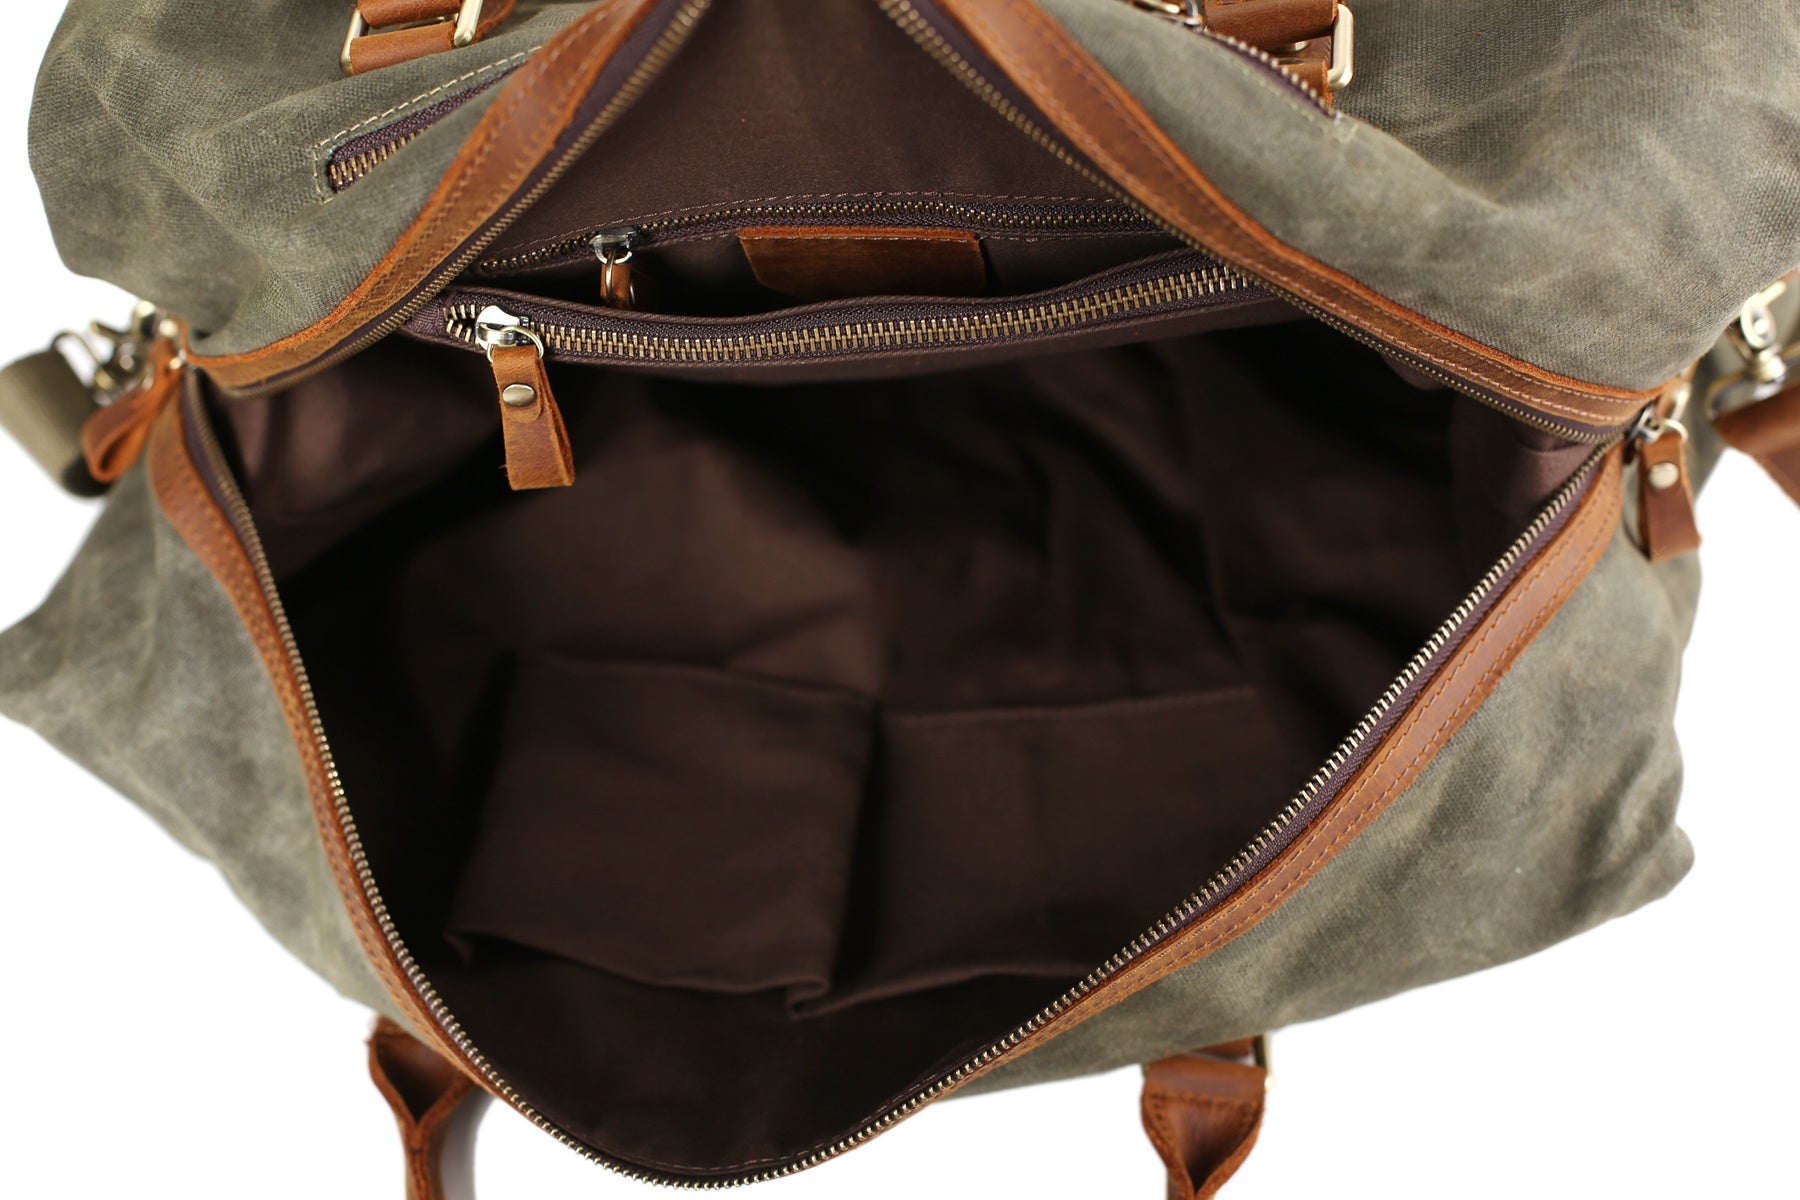 Personalized Waxed Canvas Weekender Bag For Men